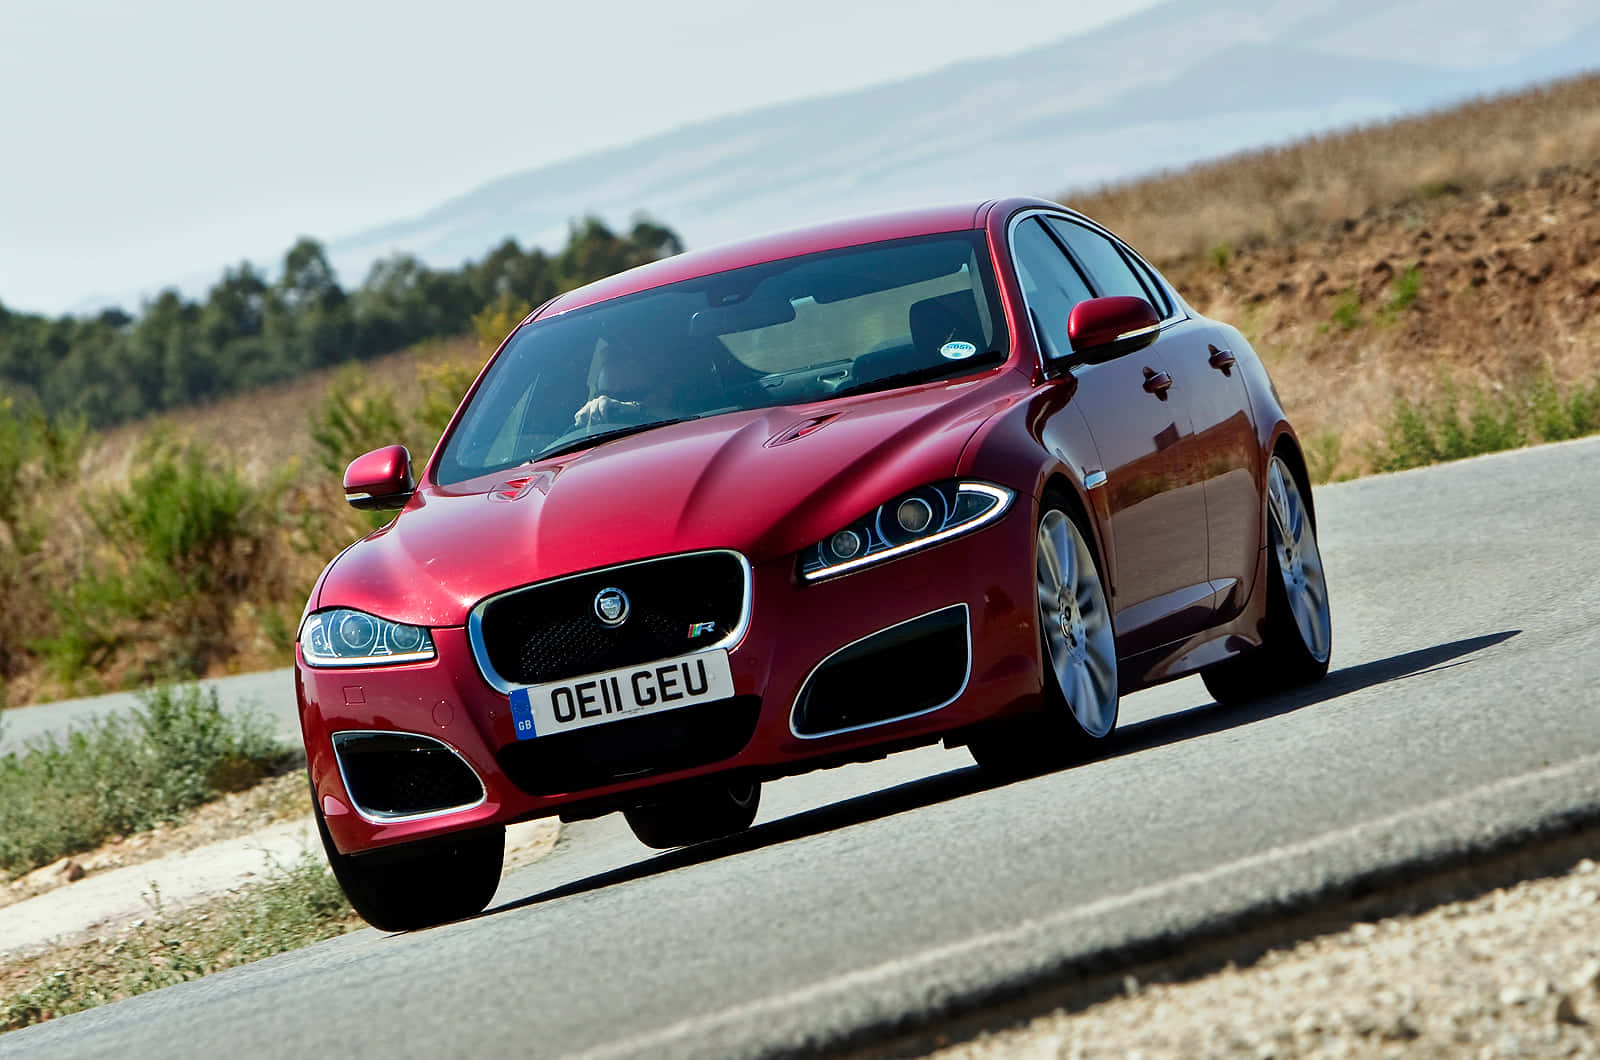 Jaguar XFR - The Epitome of Luxury and Performance Wallpaper